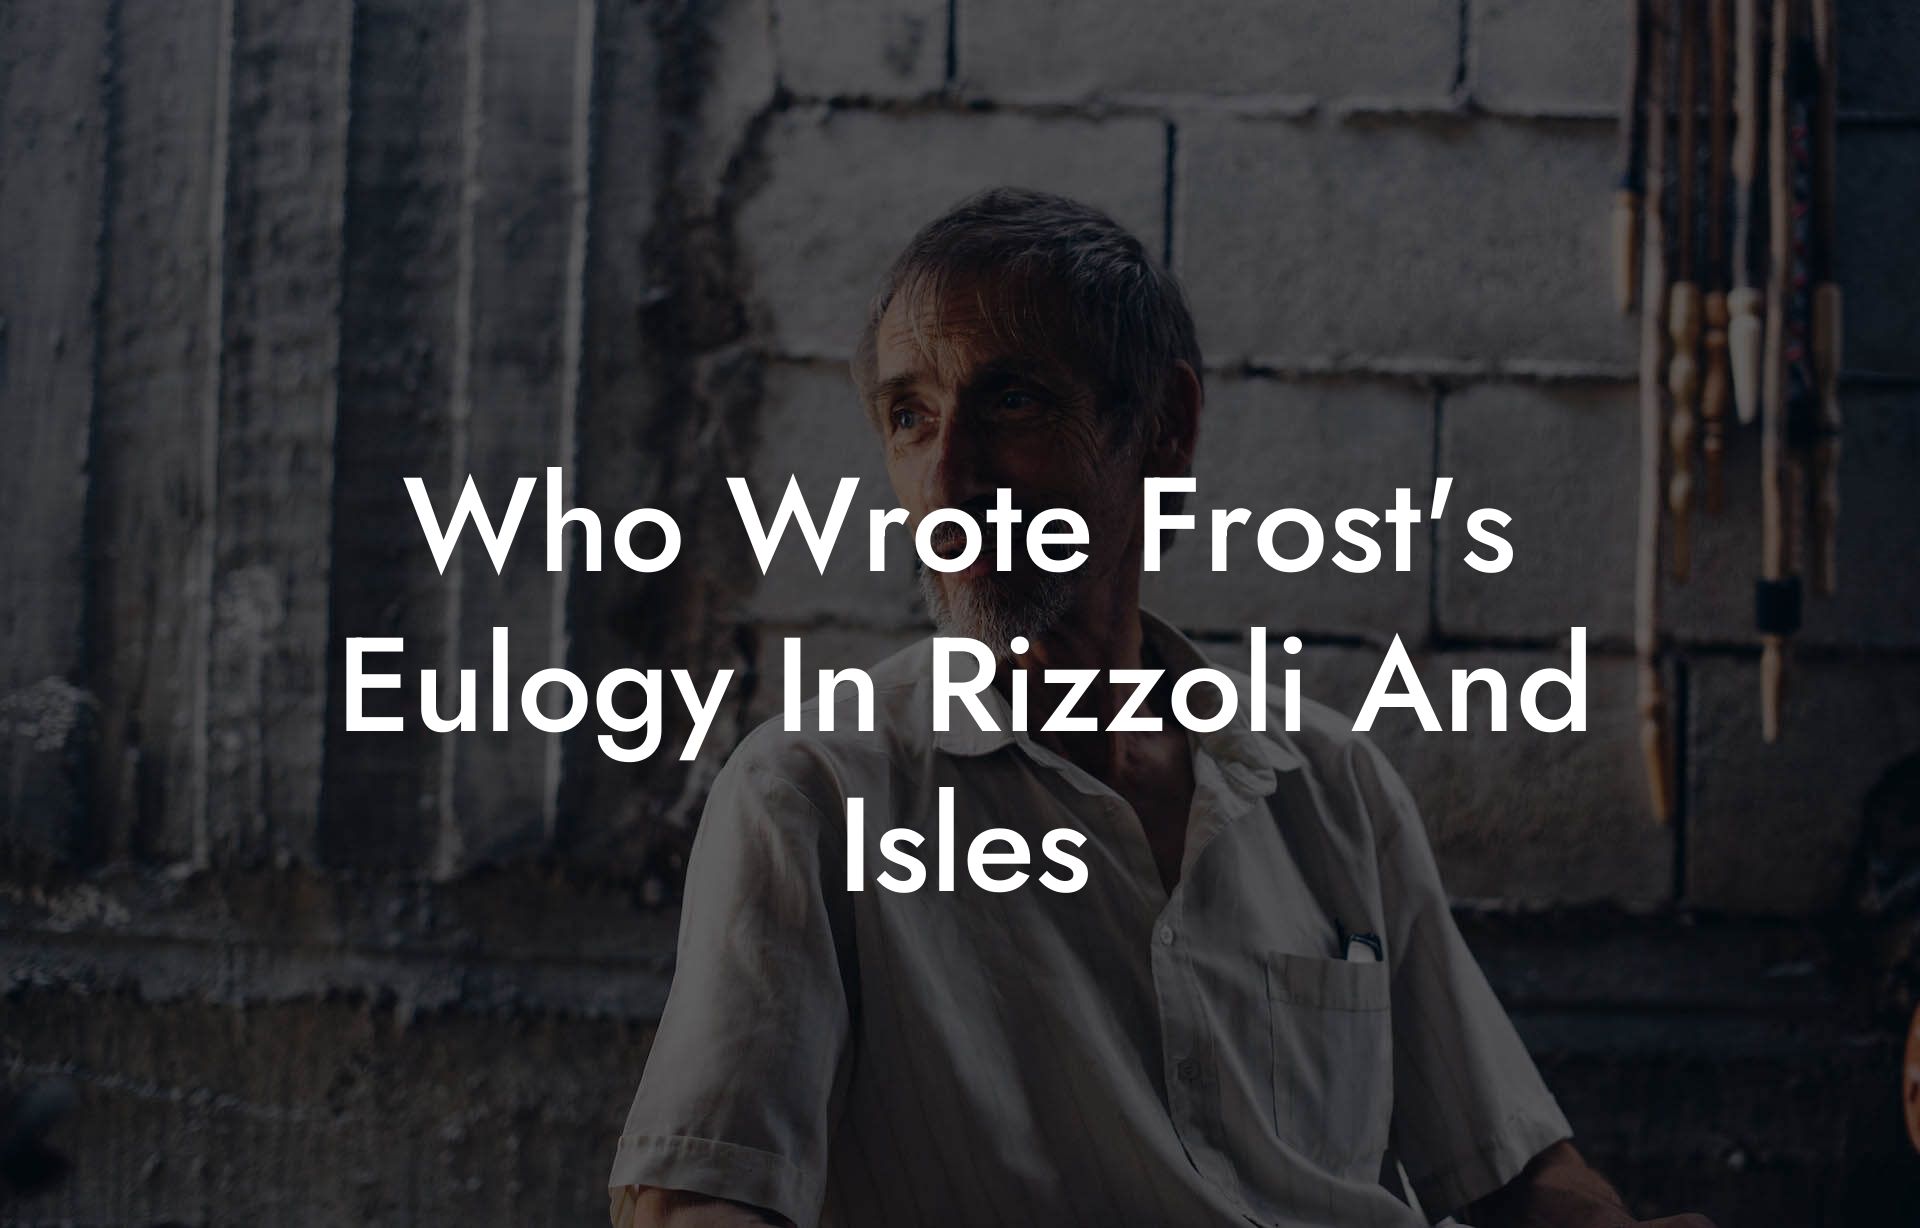 Who Wrote Frost's Eulogy In Rizzoli And Isles